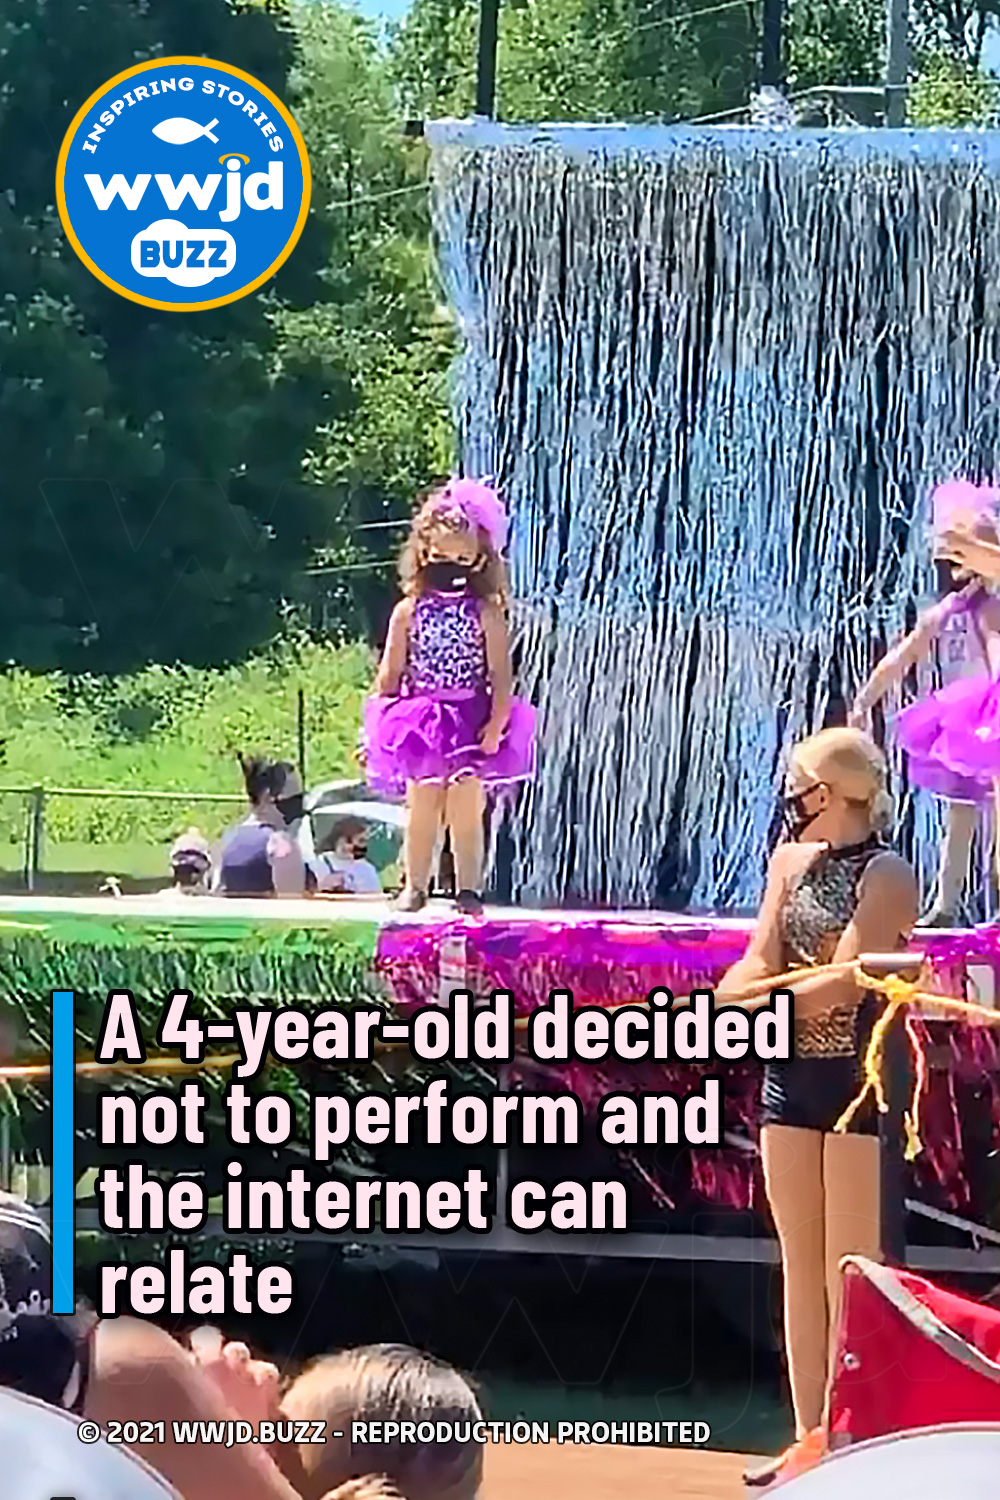 A 4-year-old decided not to perform and the internet can relate